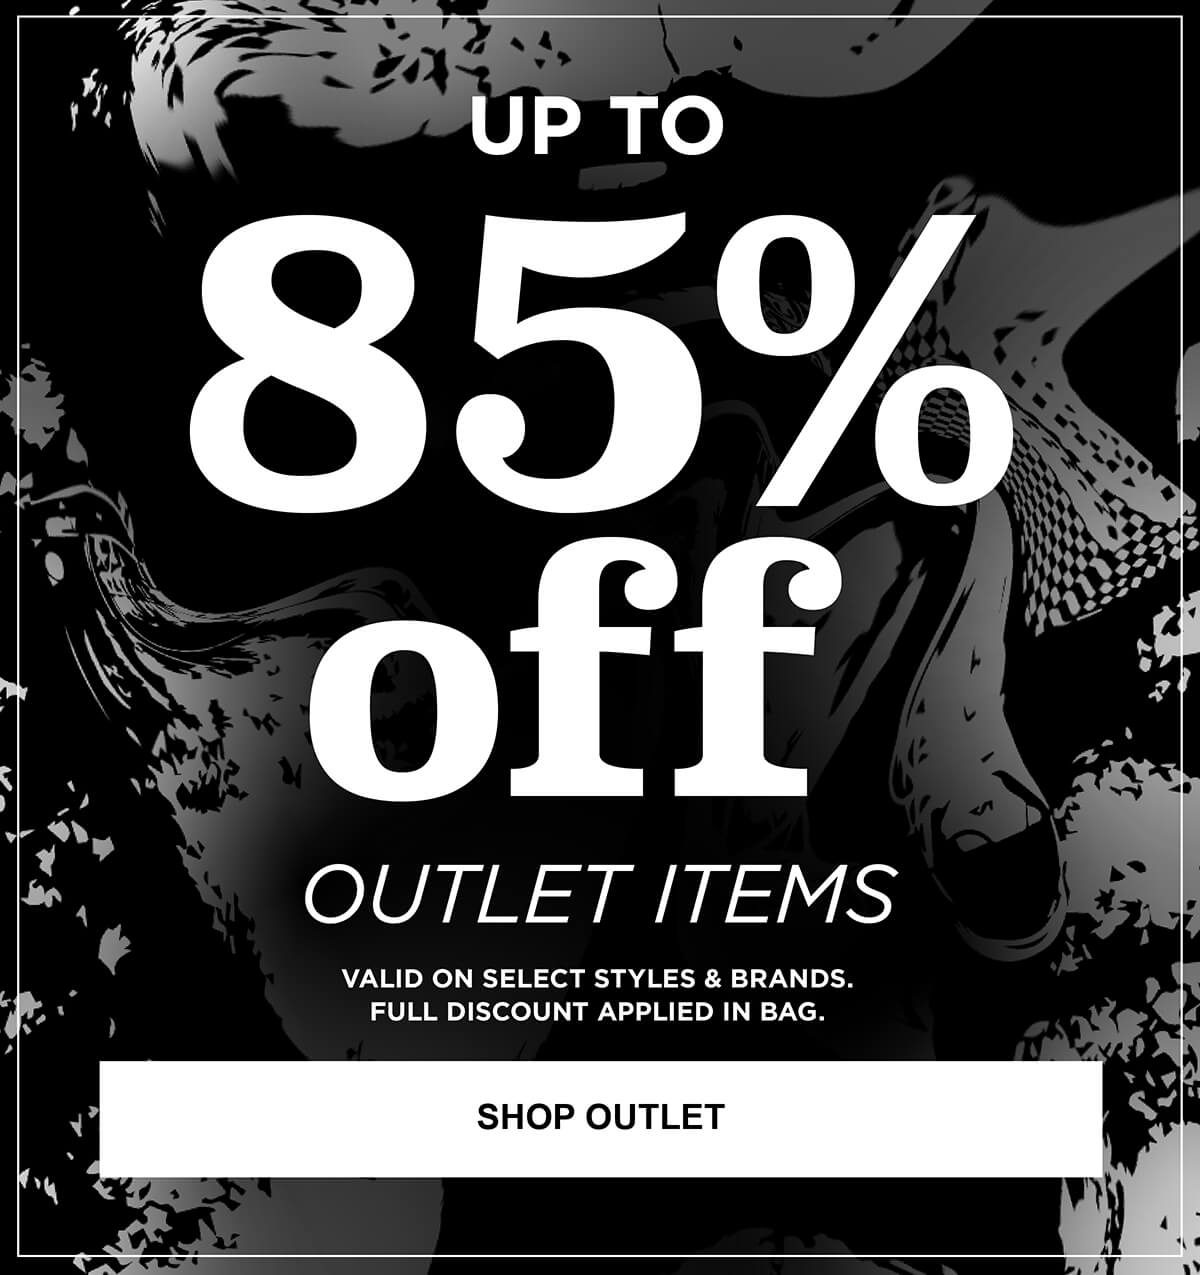 OUTLET - UP TO 85% OFF LAST MARKED PRICE - SHOP NOW